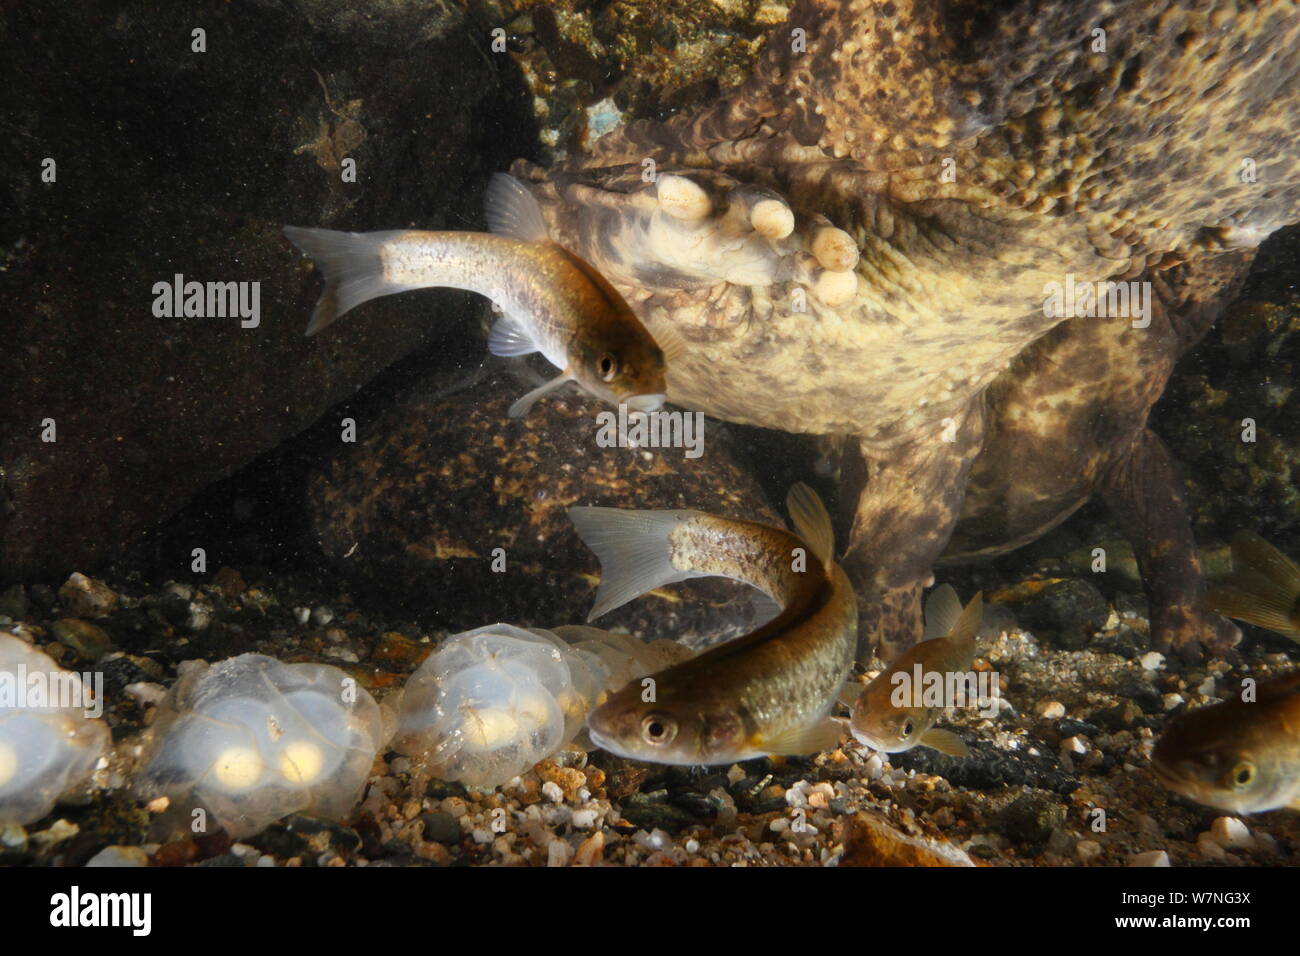 Pair of Japanese giant salamanders (Andrias japonicus) at the entrance to their nest, spawning, Japan, September Stock Photo